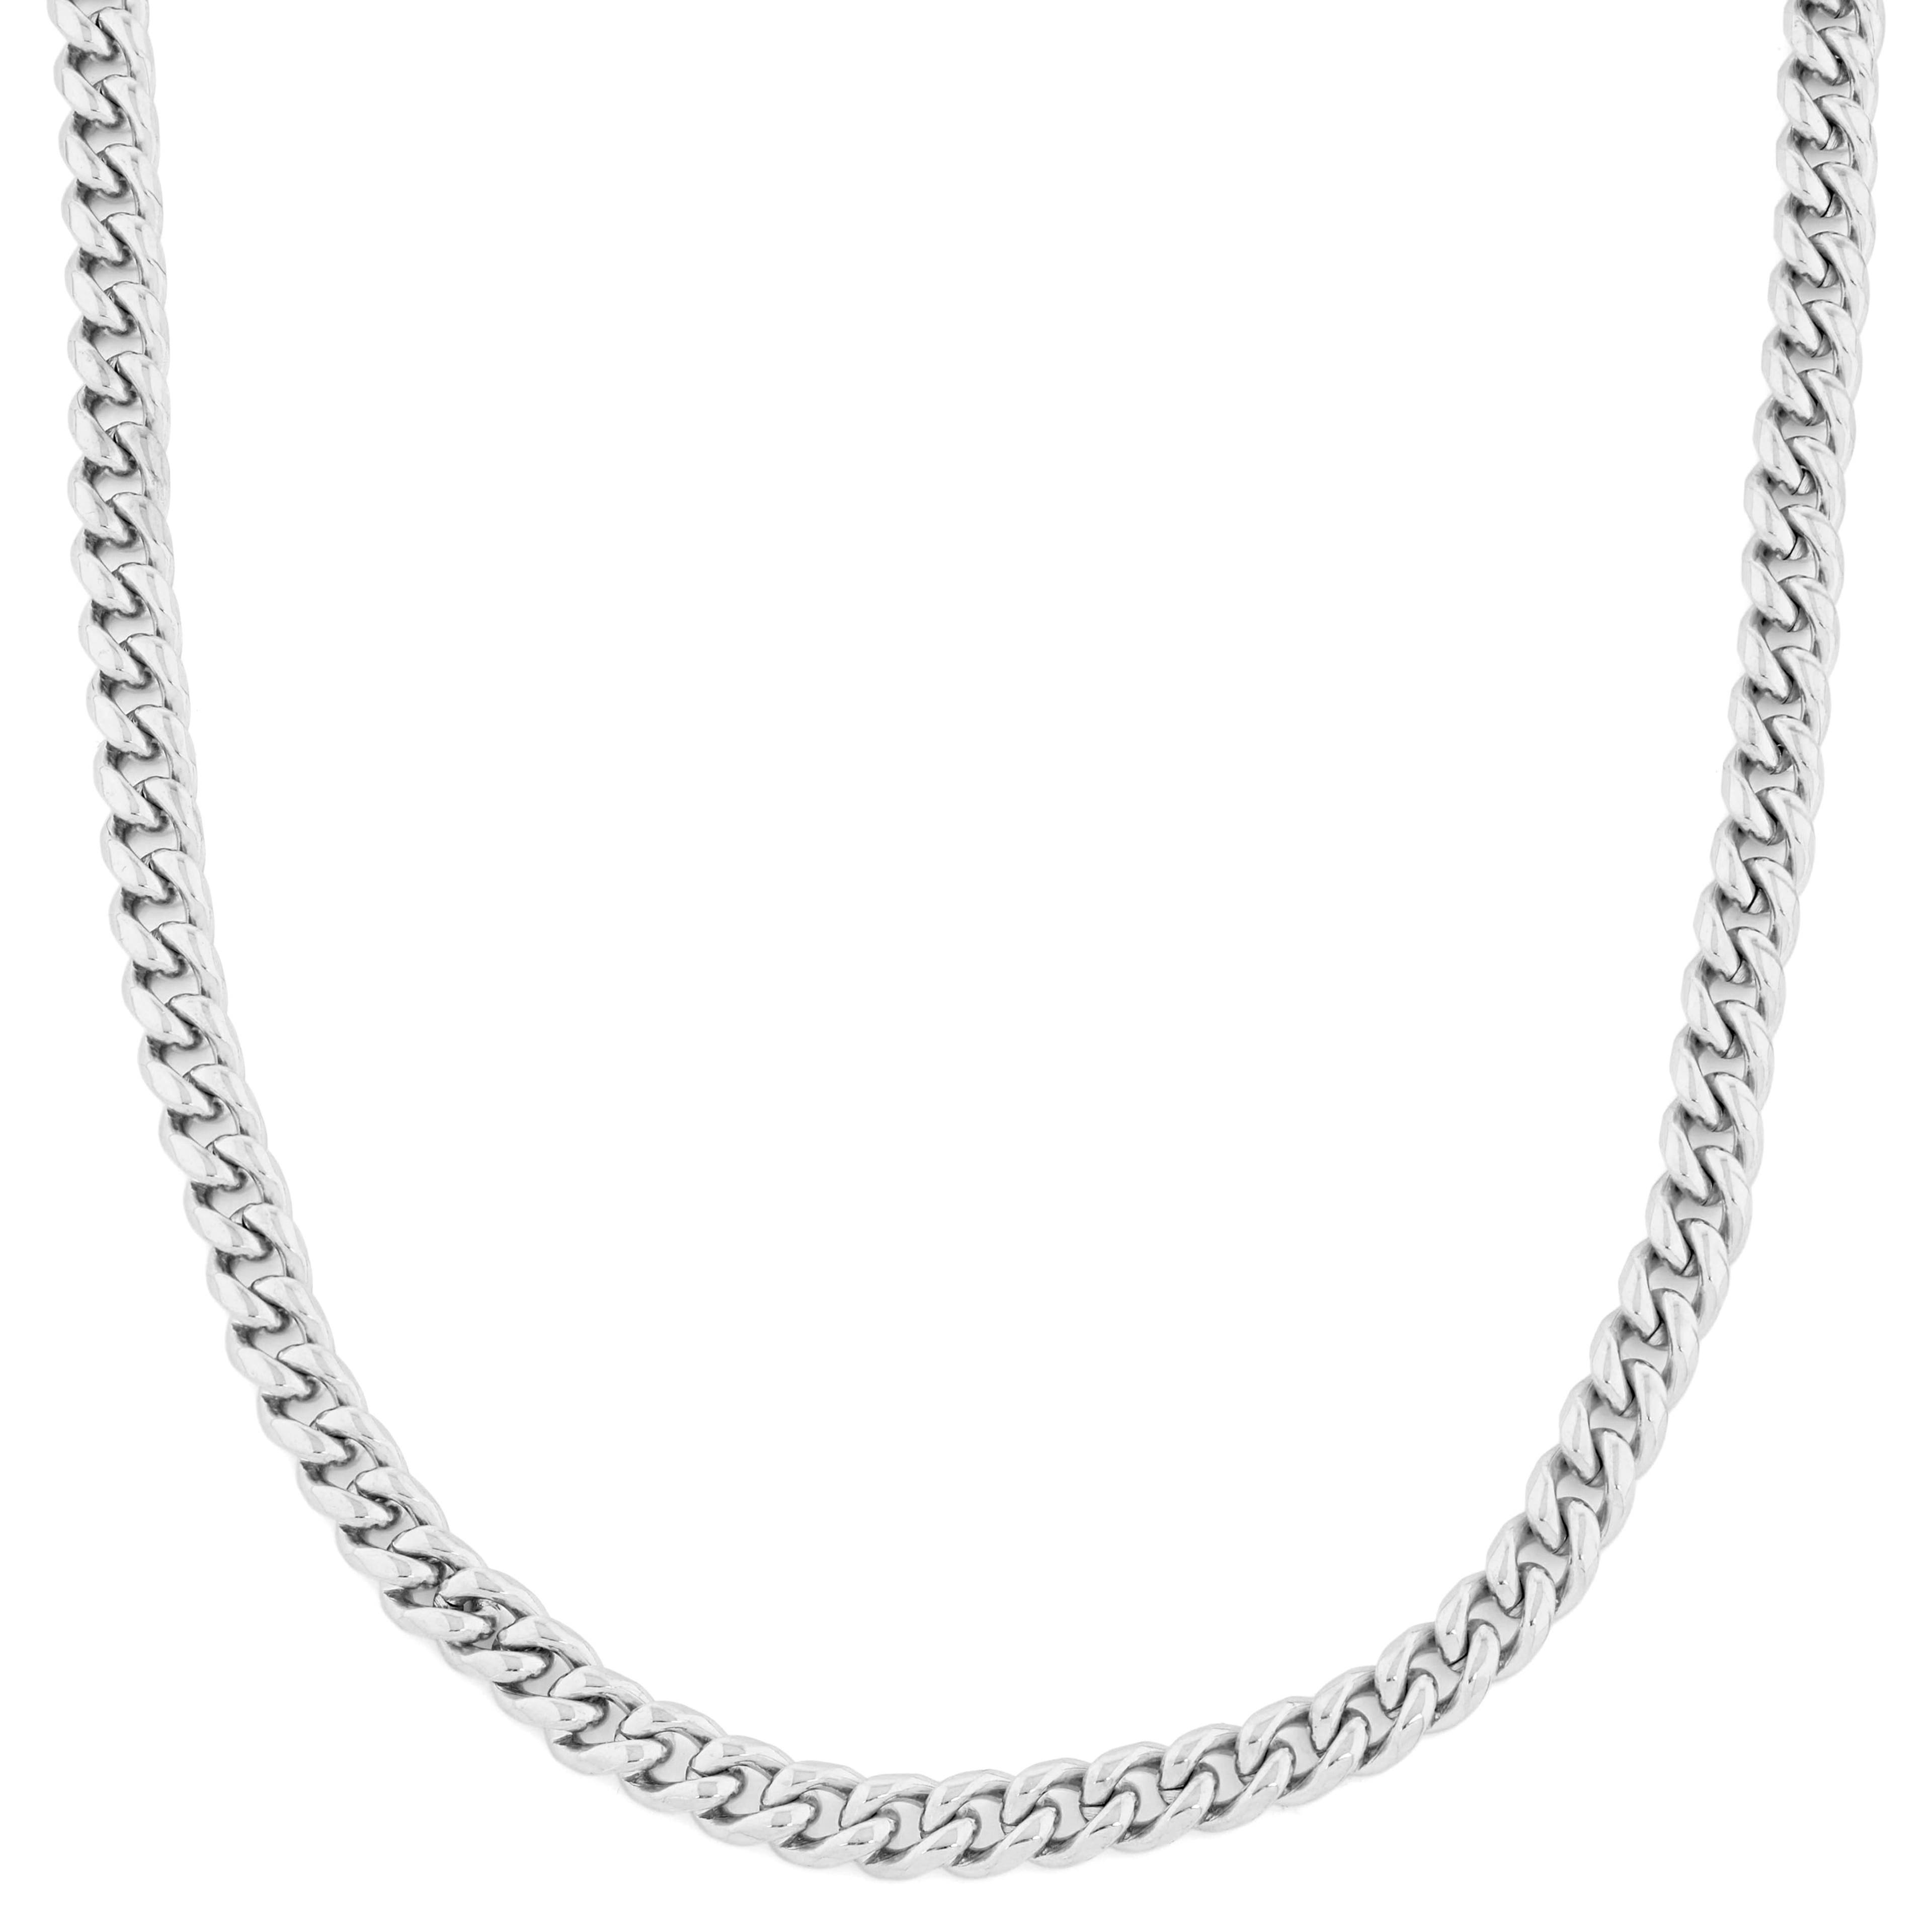 8mm Silver-Tone Stainless Steel Curb Chain Bracelet